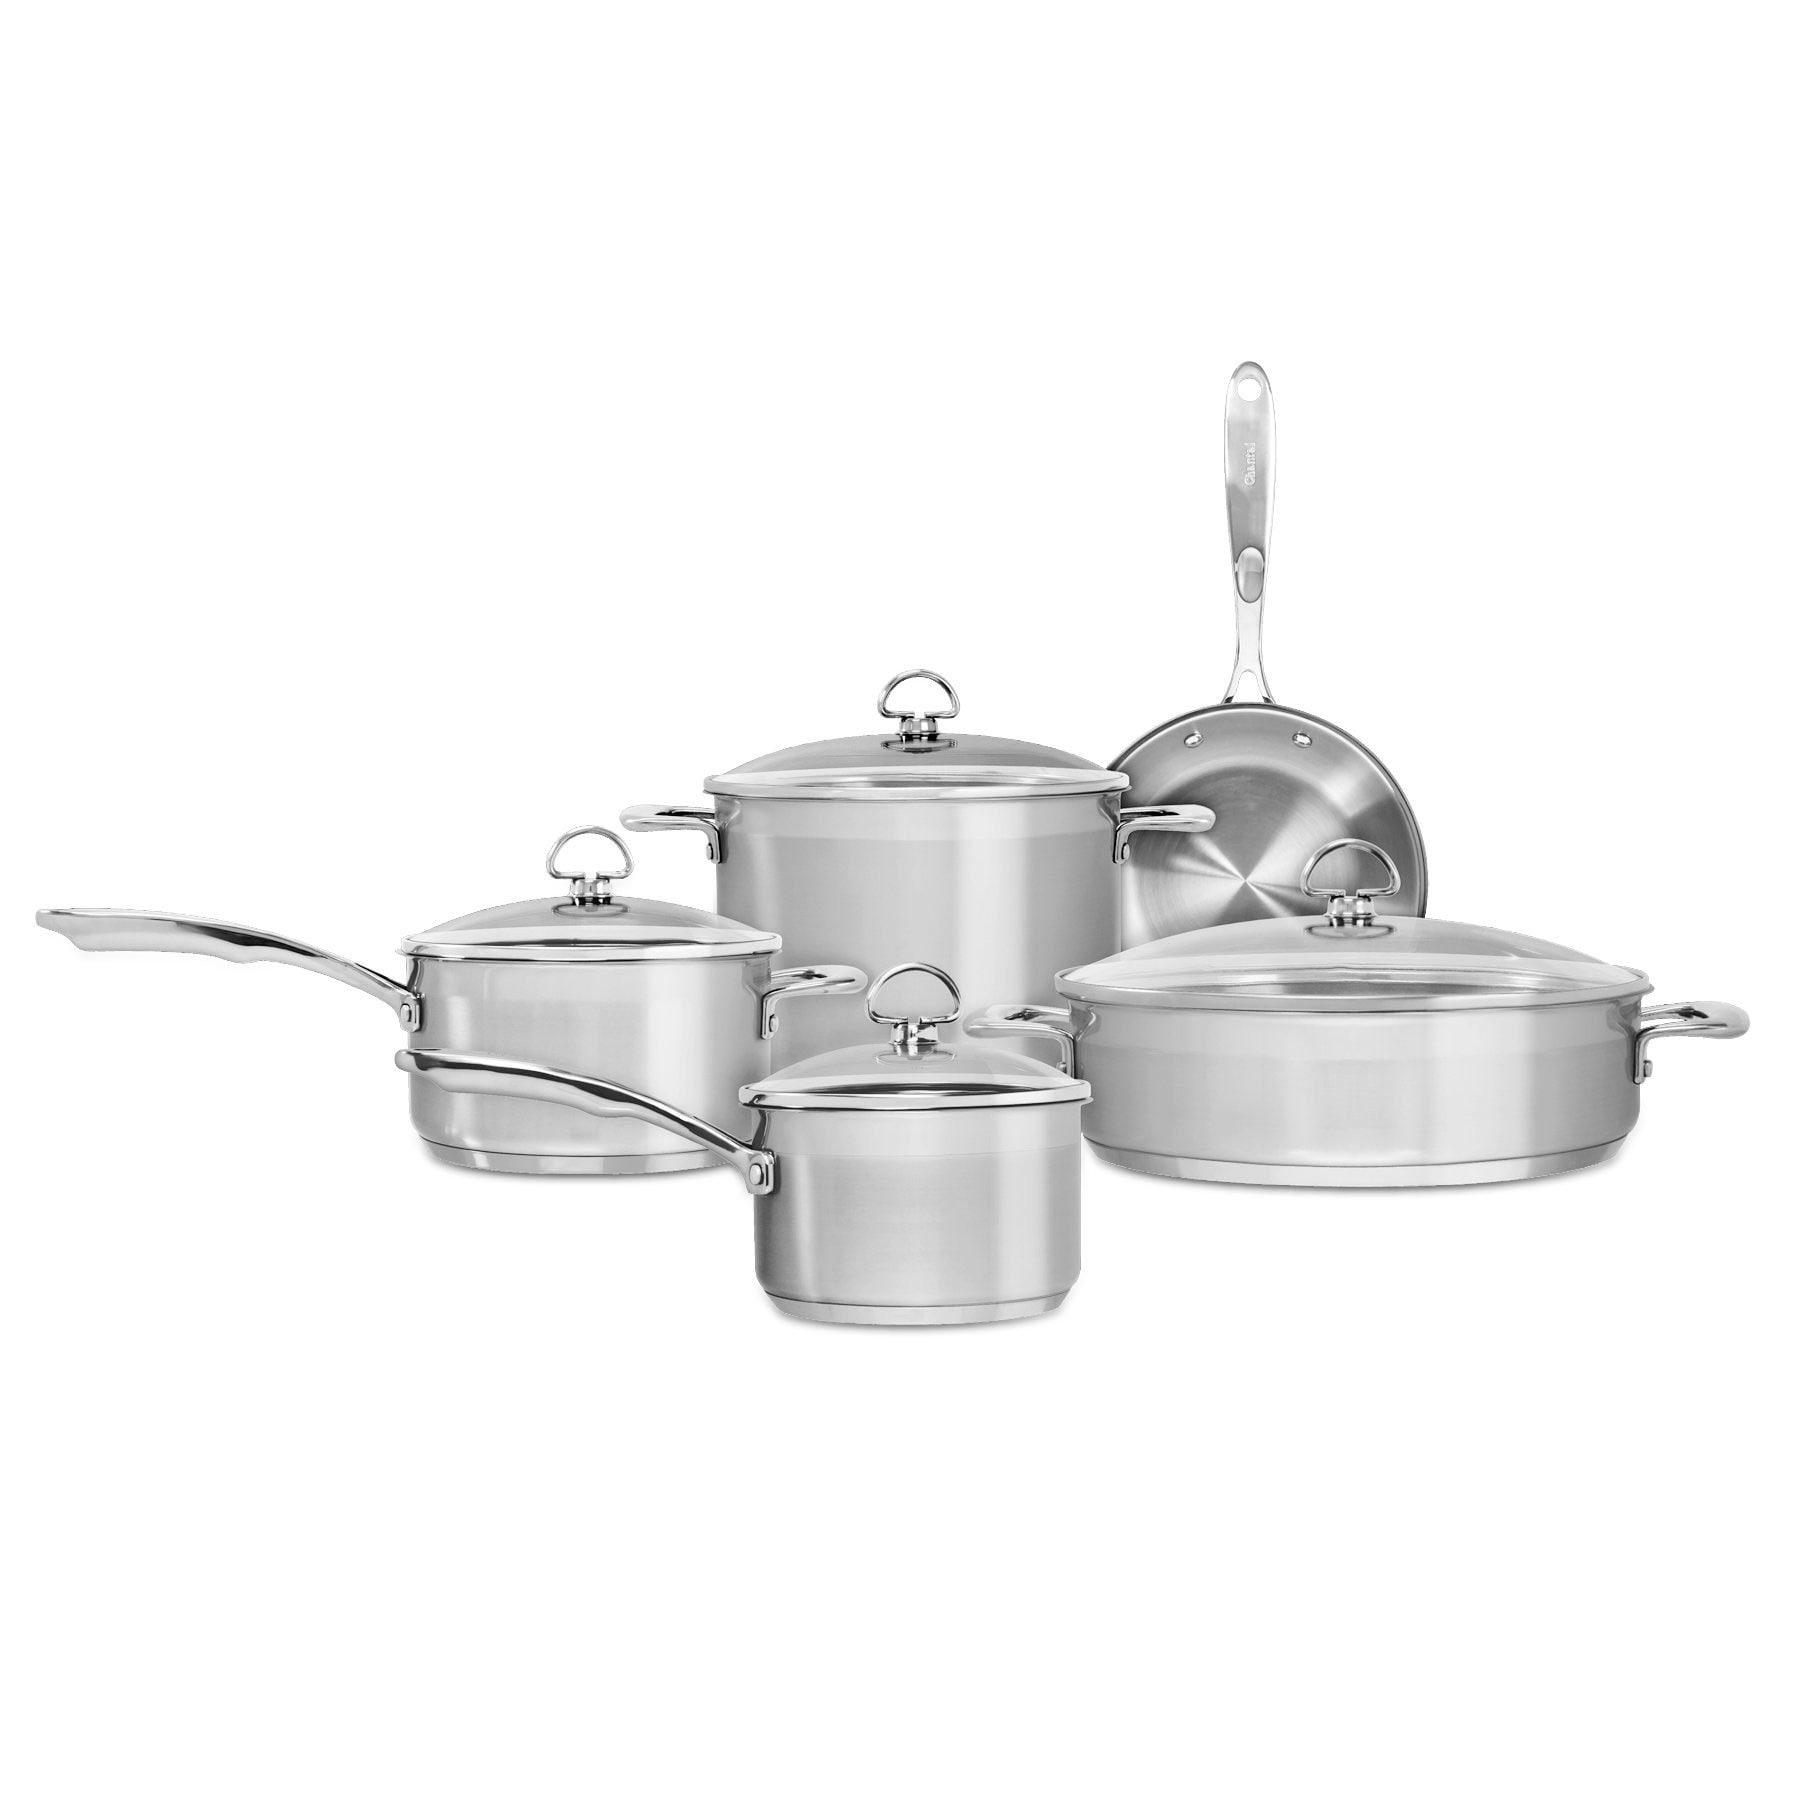 Chantal Induction 21 Steel 12-Qt. Stockpot with Glass Lid - Stainless